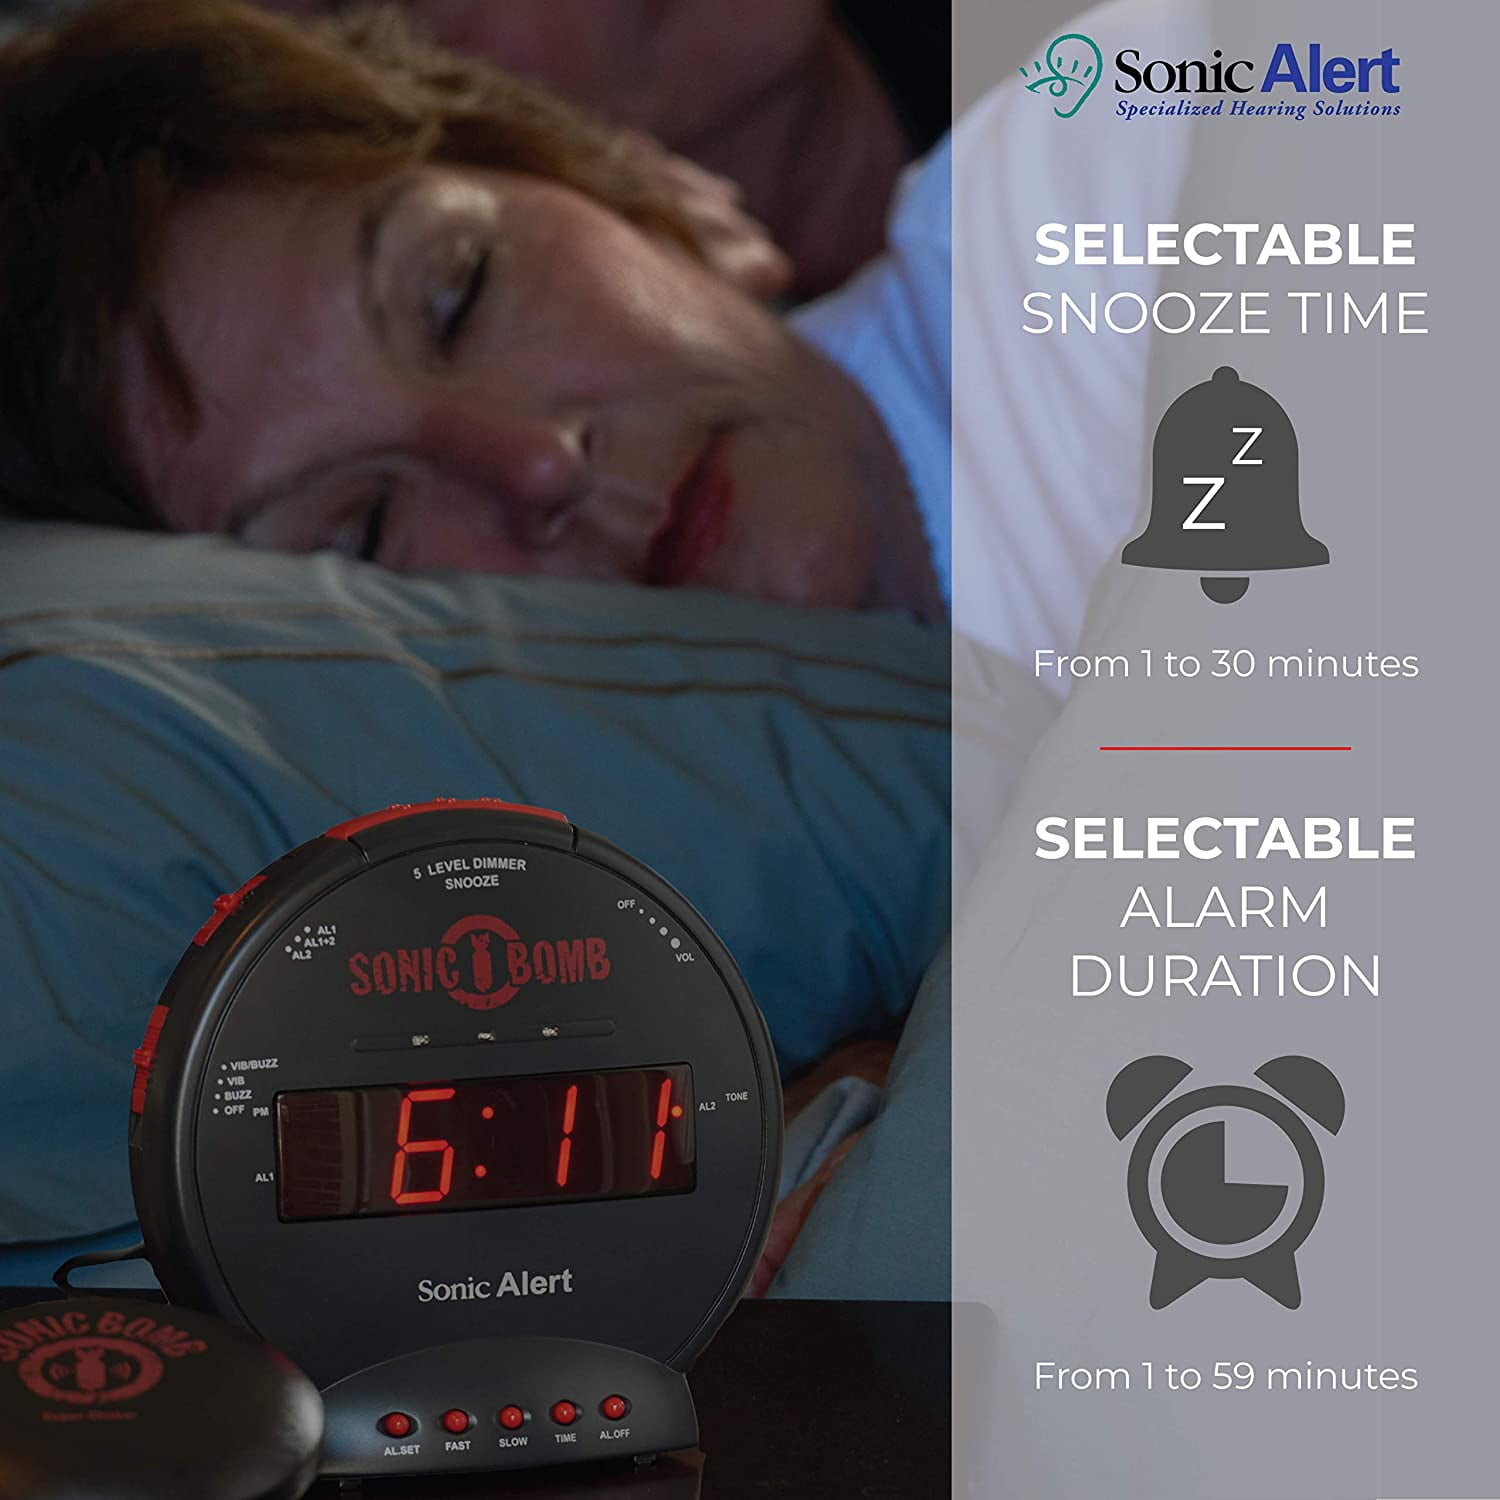 Sonic Alert - Sonic Bomb Dual Alarm Clock with Bed Shaker Vibrator and Digital Display - Black & Red - image 7 of 10